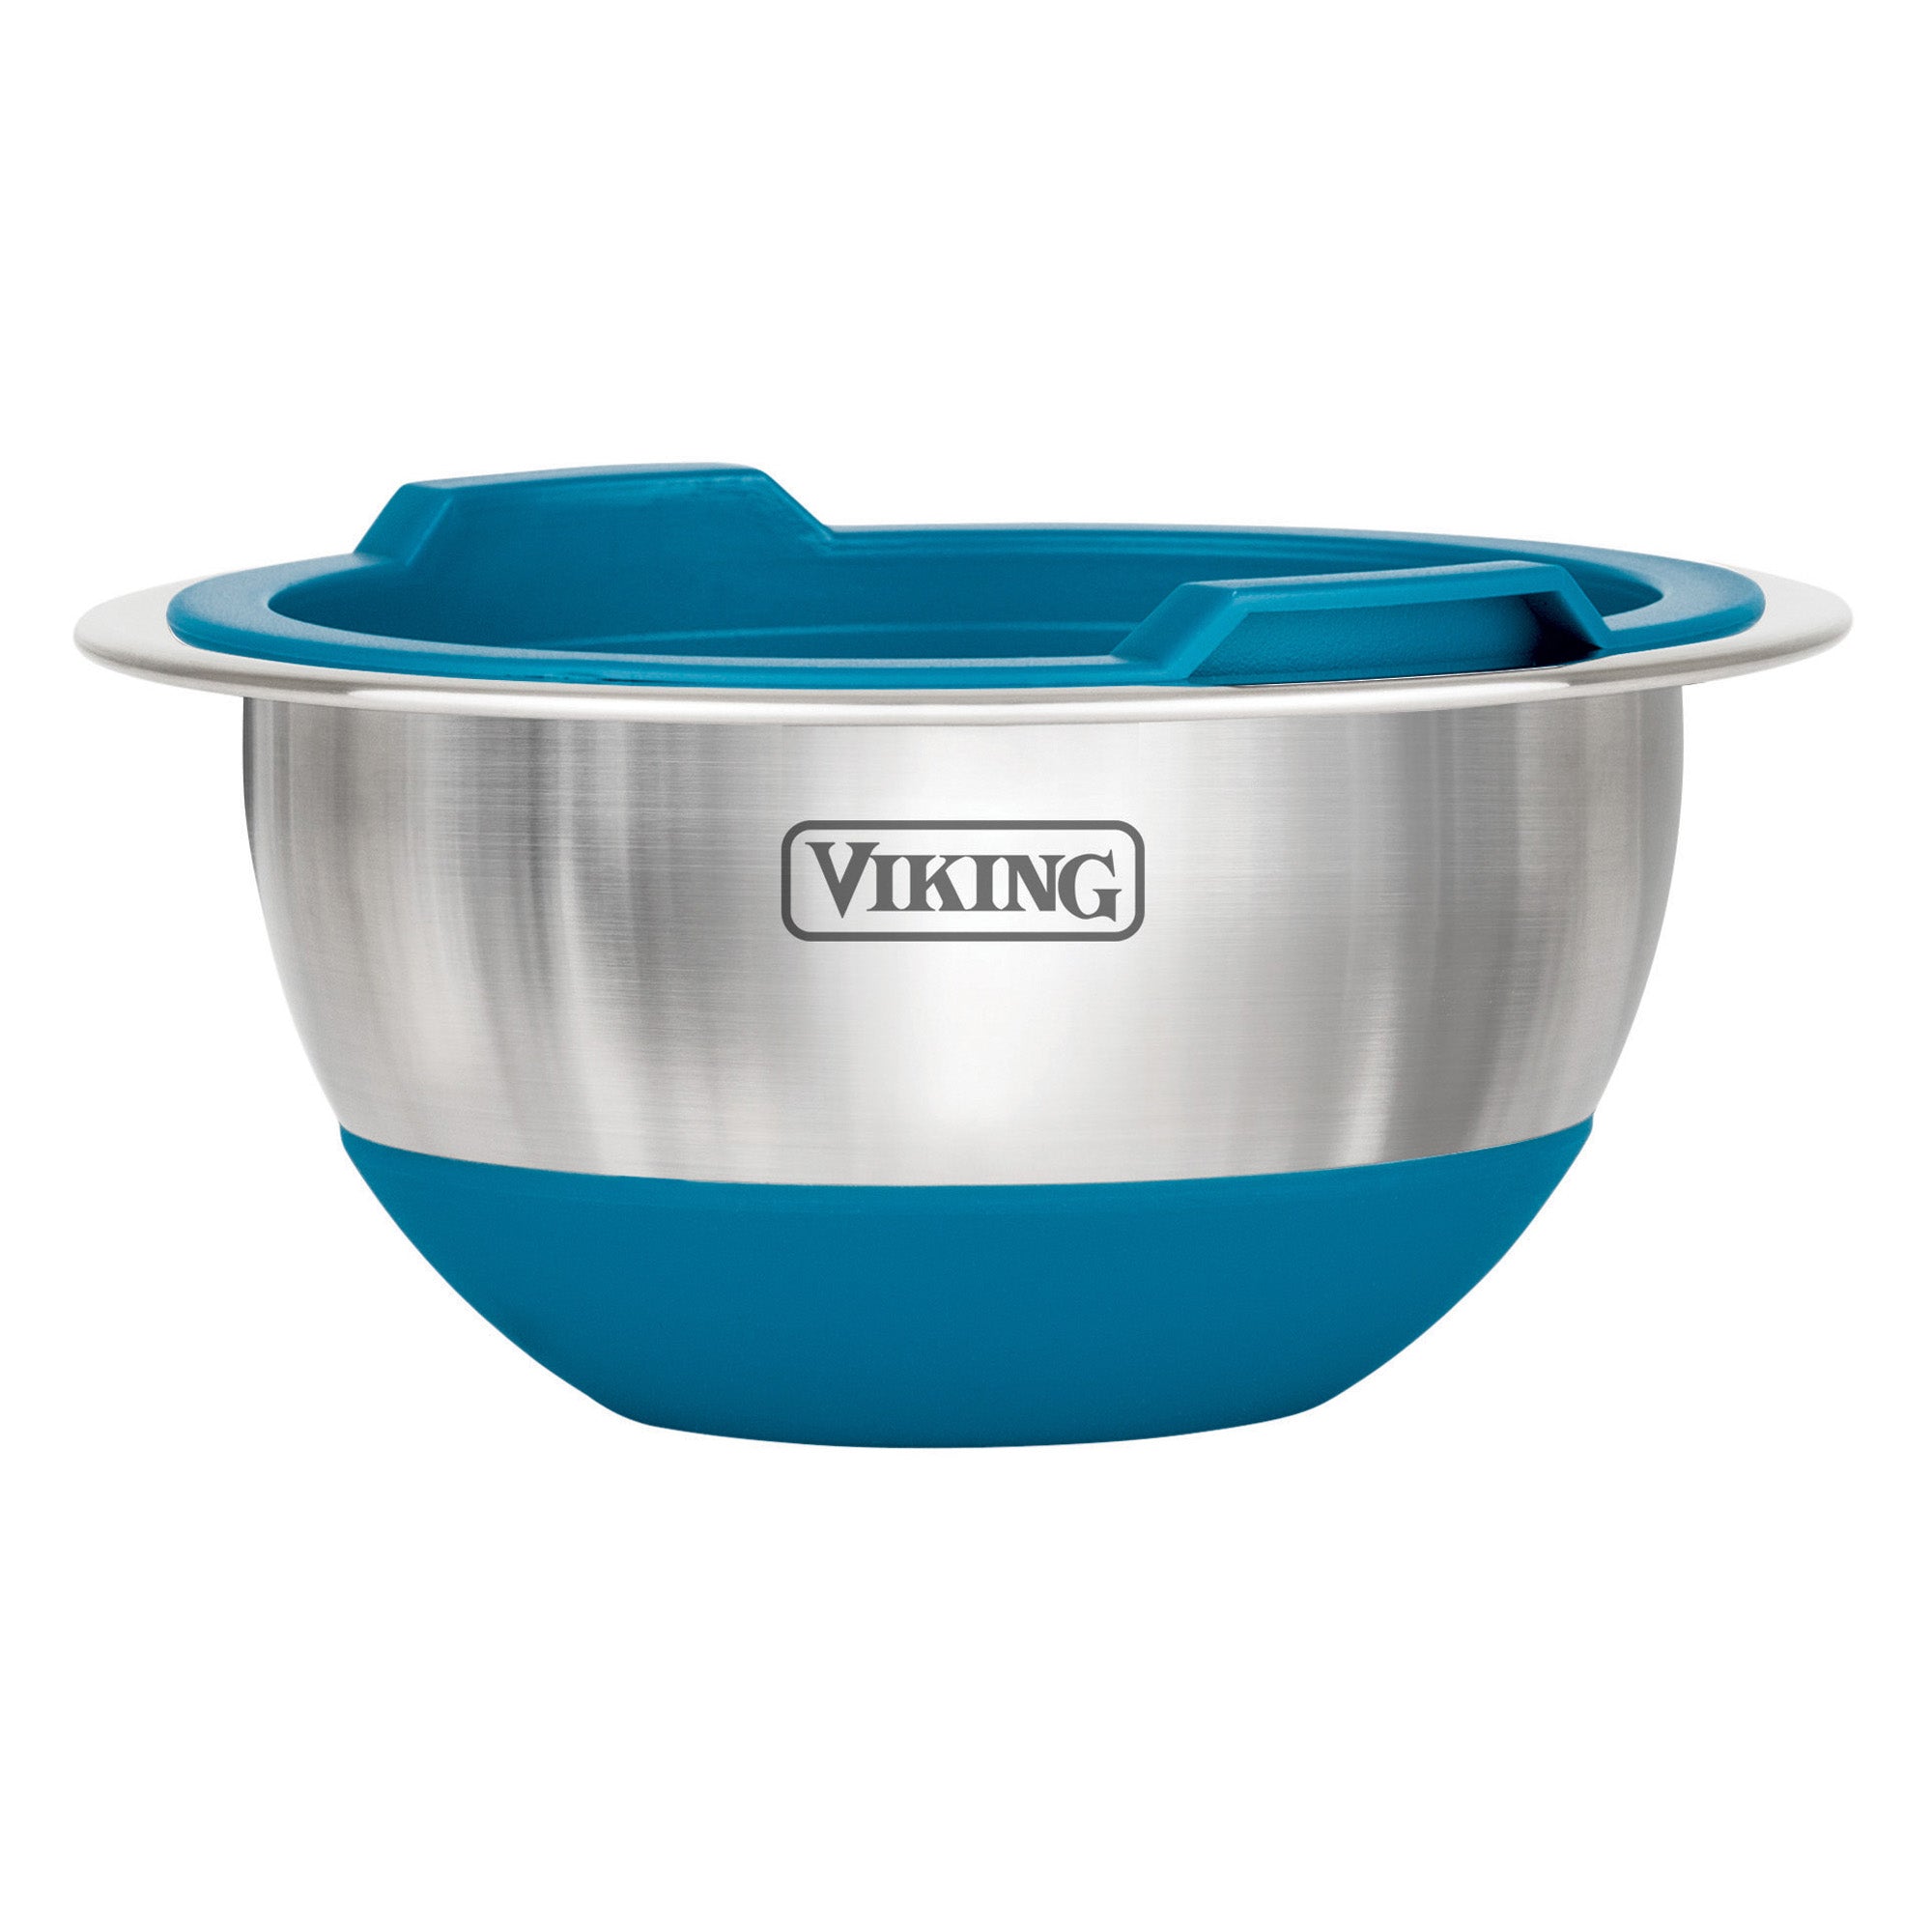 Viking 10-Piece Stainless Steel Mixing Bowl Set with Lids, Teal